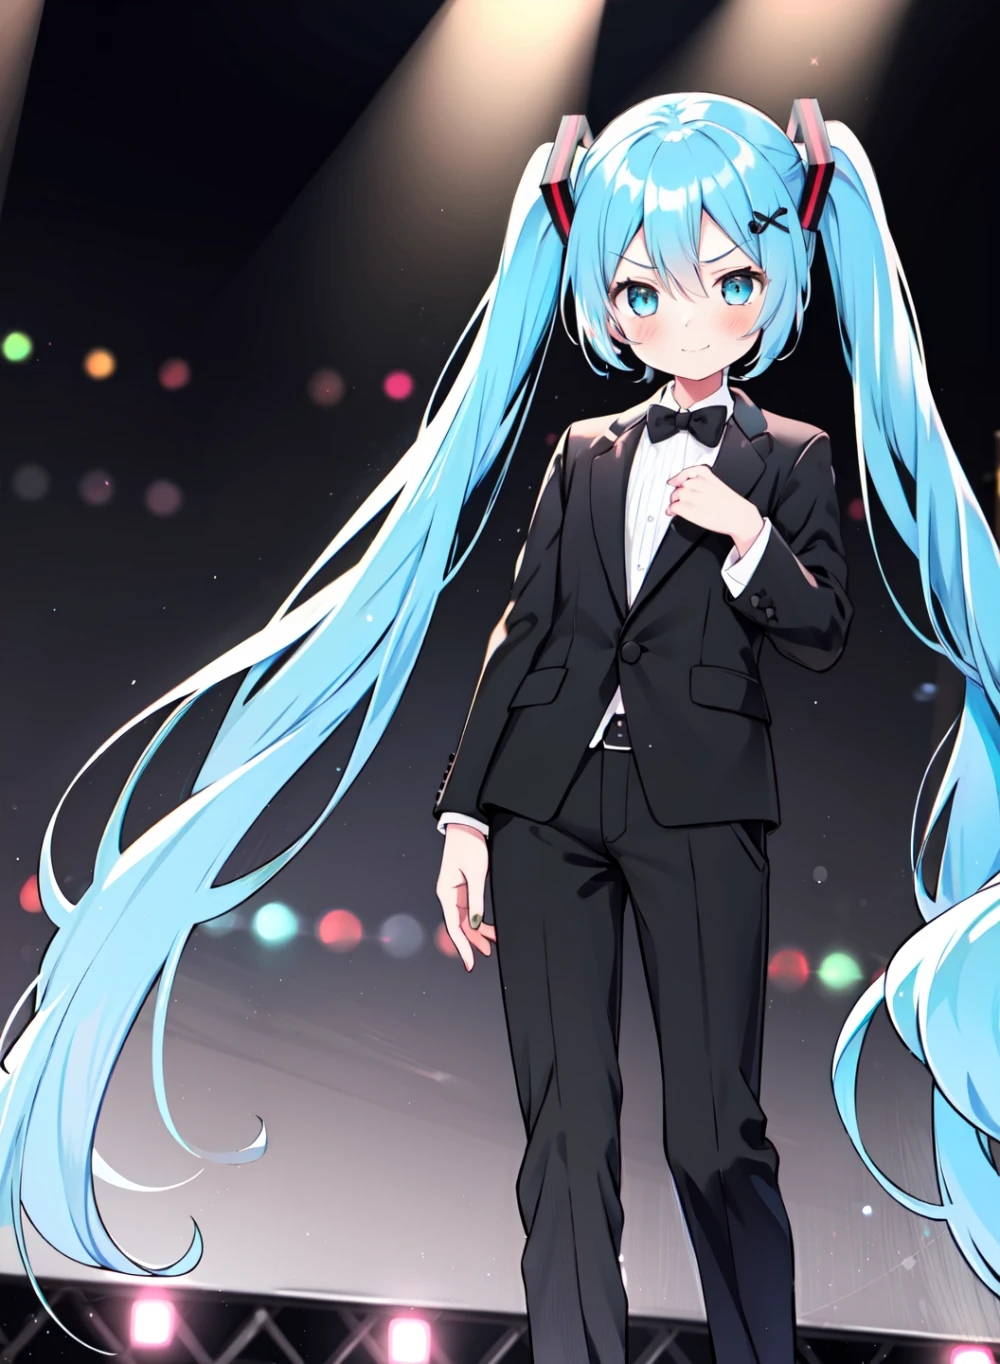 hatsune-miku-anime-style-all-ages-2-28